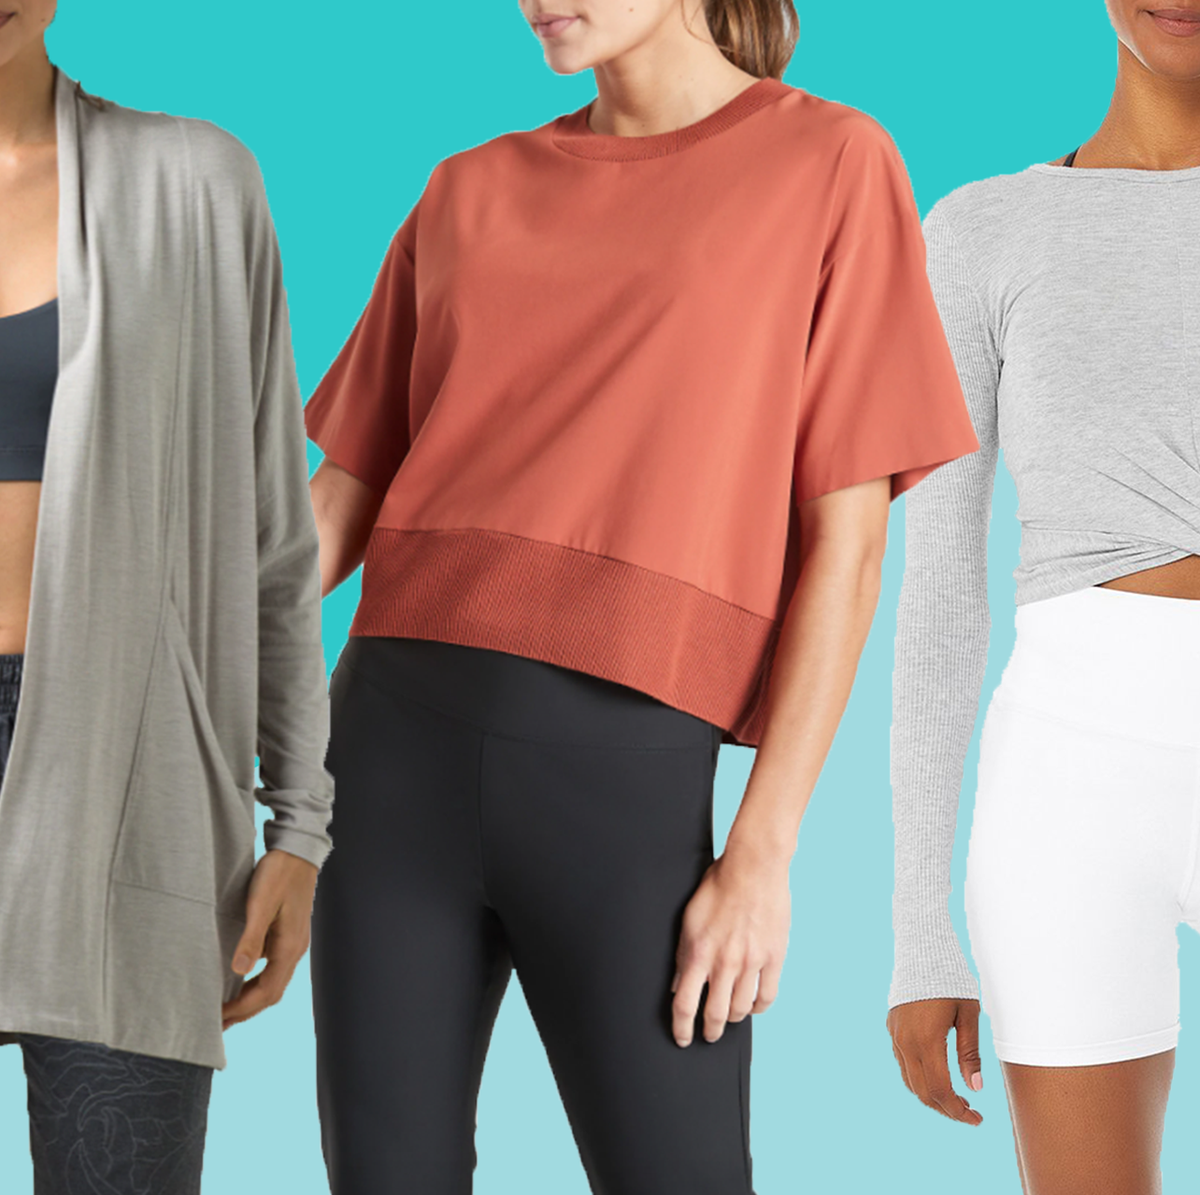 10 women's athleisure pieces we'd love to wear for golf